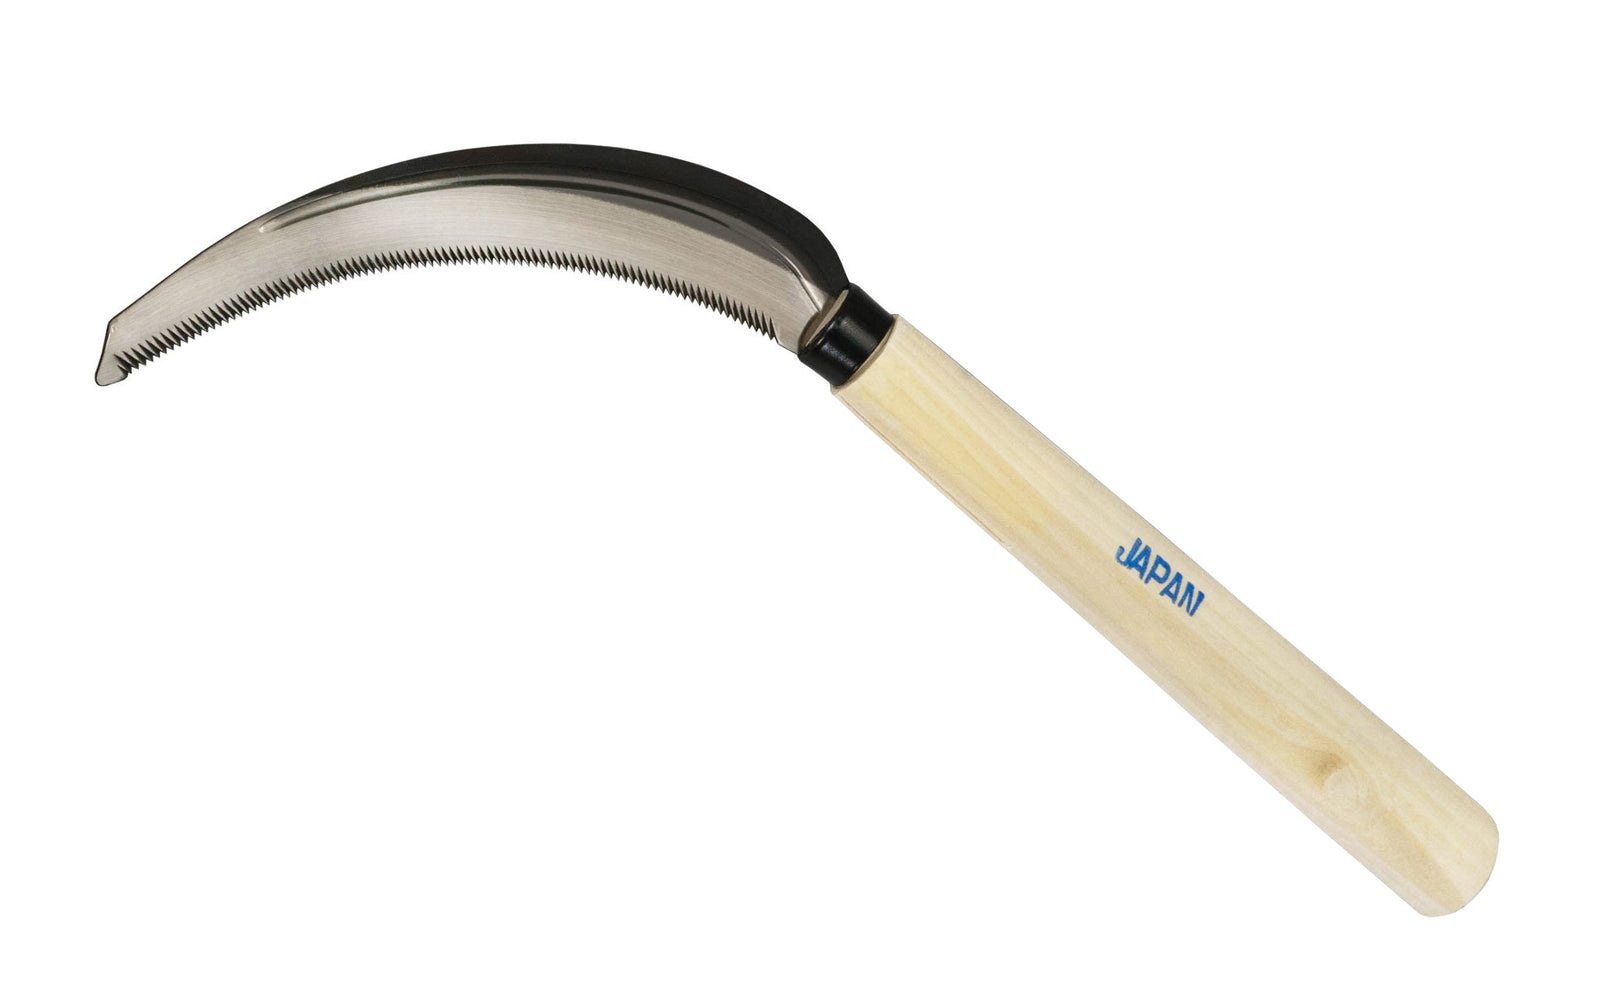 Traditional Japanese Nokogama Sickle-Saw great for outdoor landscaping needs. Made of high carbon steel, the blade of this weeder is very sharp with aggressive teeth & the blade is slightly curved for fast aggressive cutting. Noko Gama hand sickle will cut grasses, tough weeds, sod & turf, roots, stems. Made in Japan